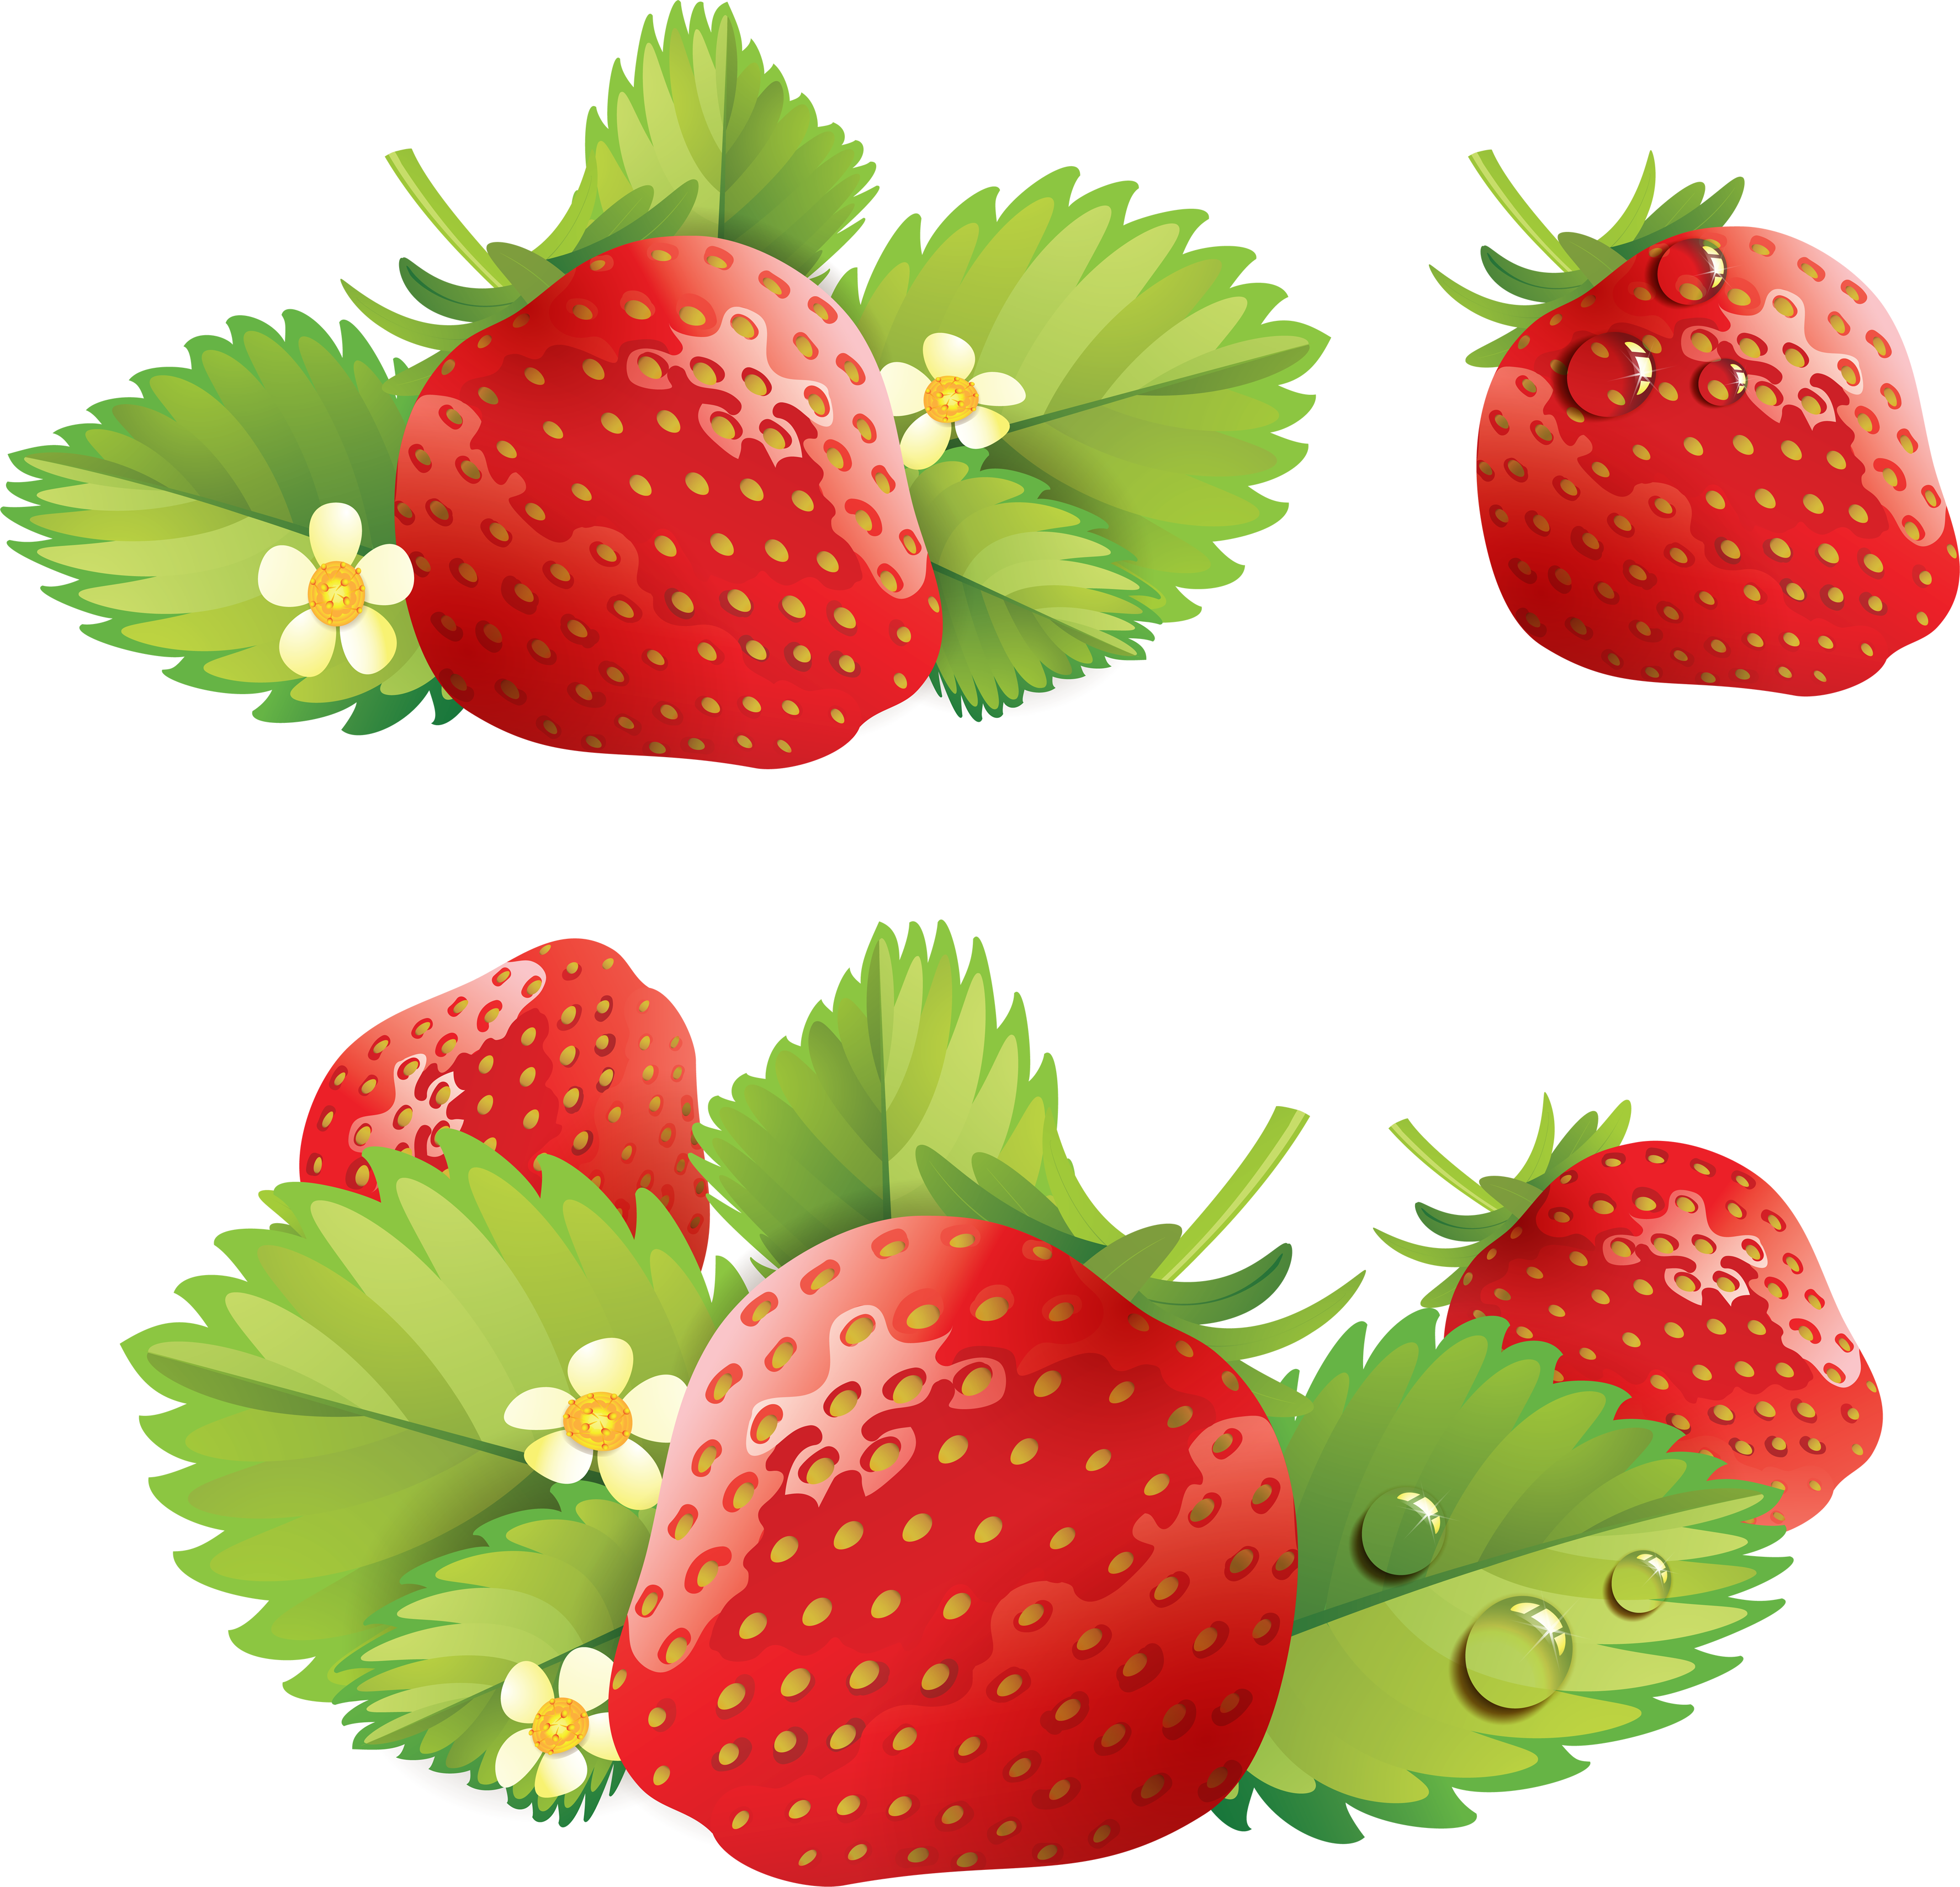 Strawberries with leaves PNG image